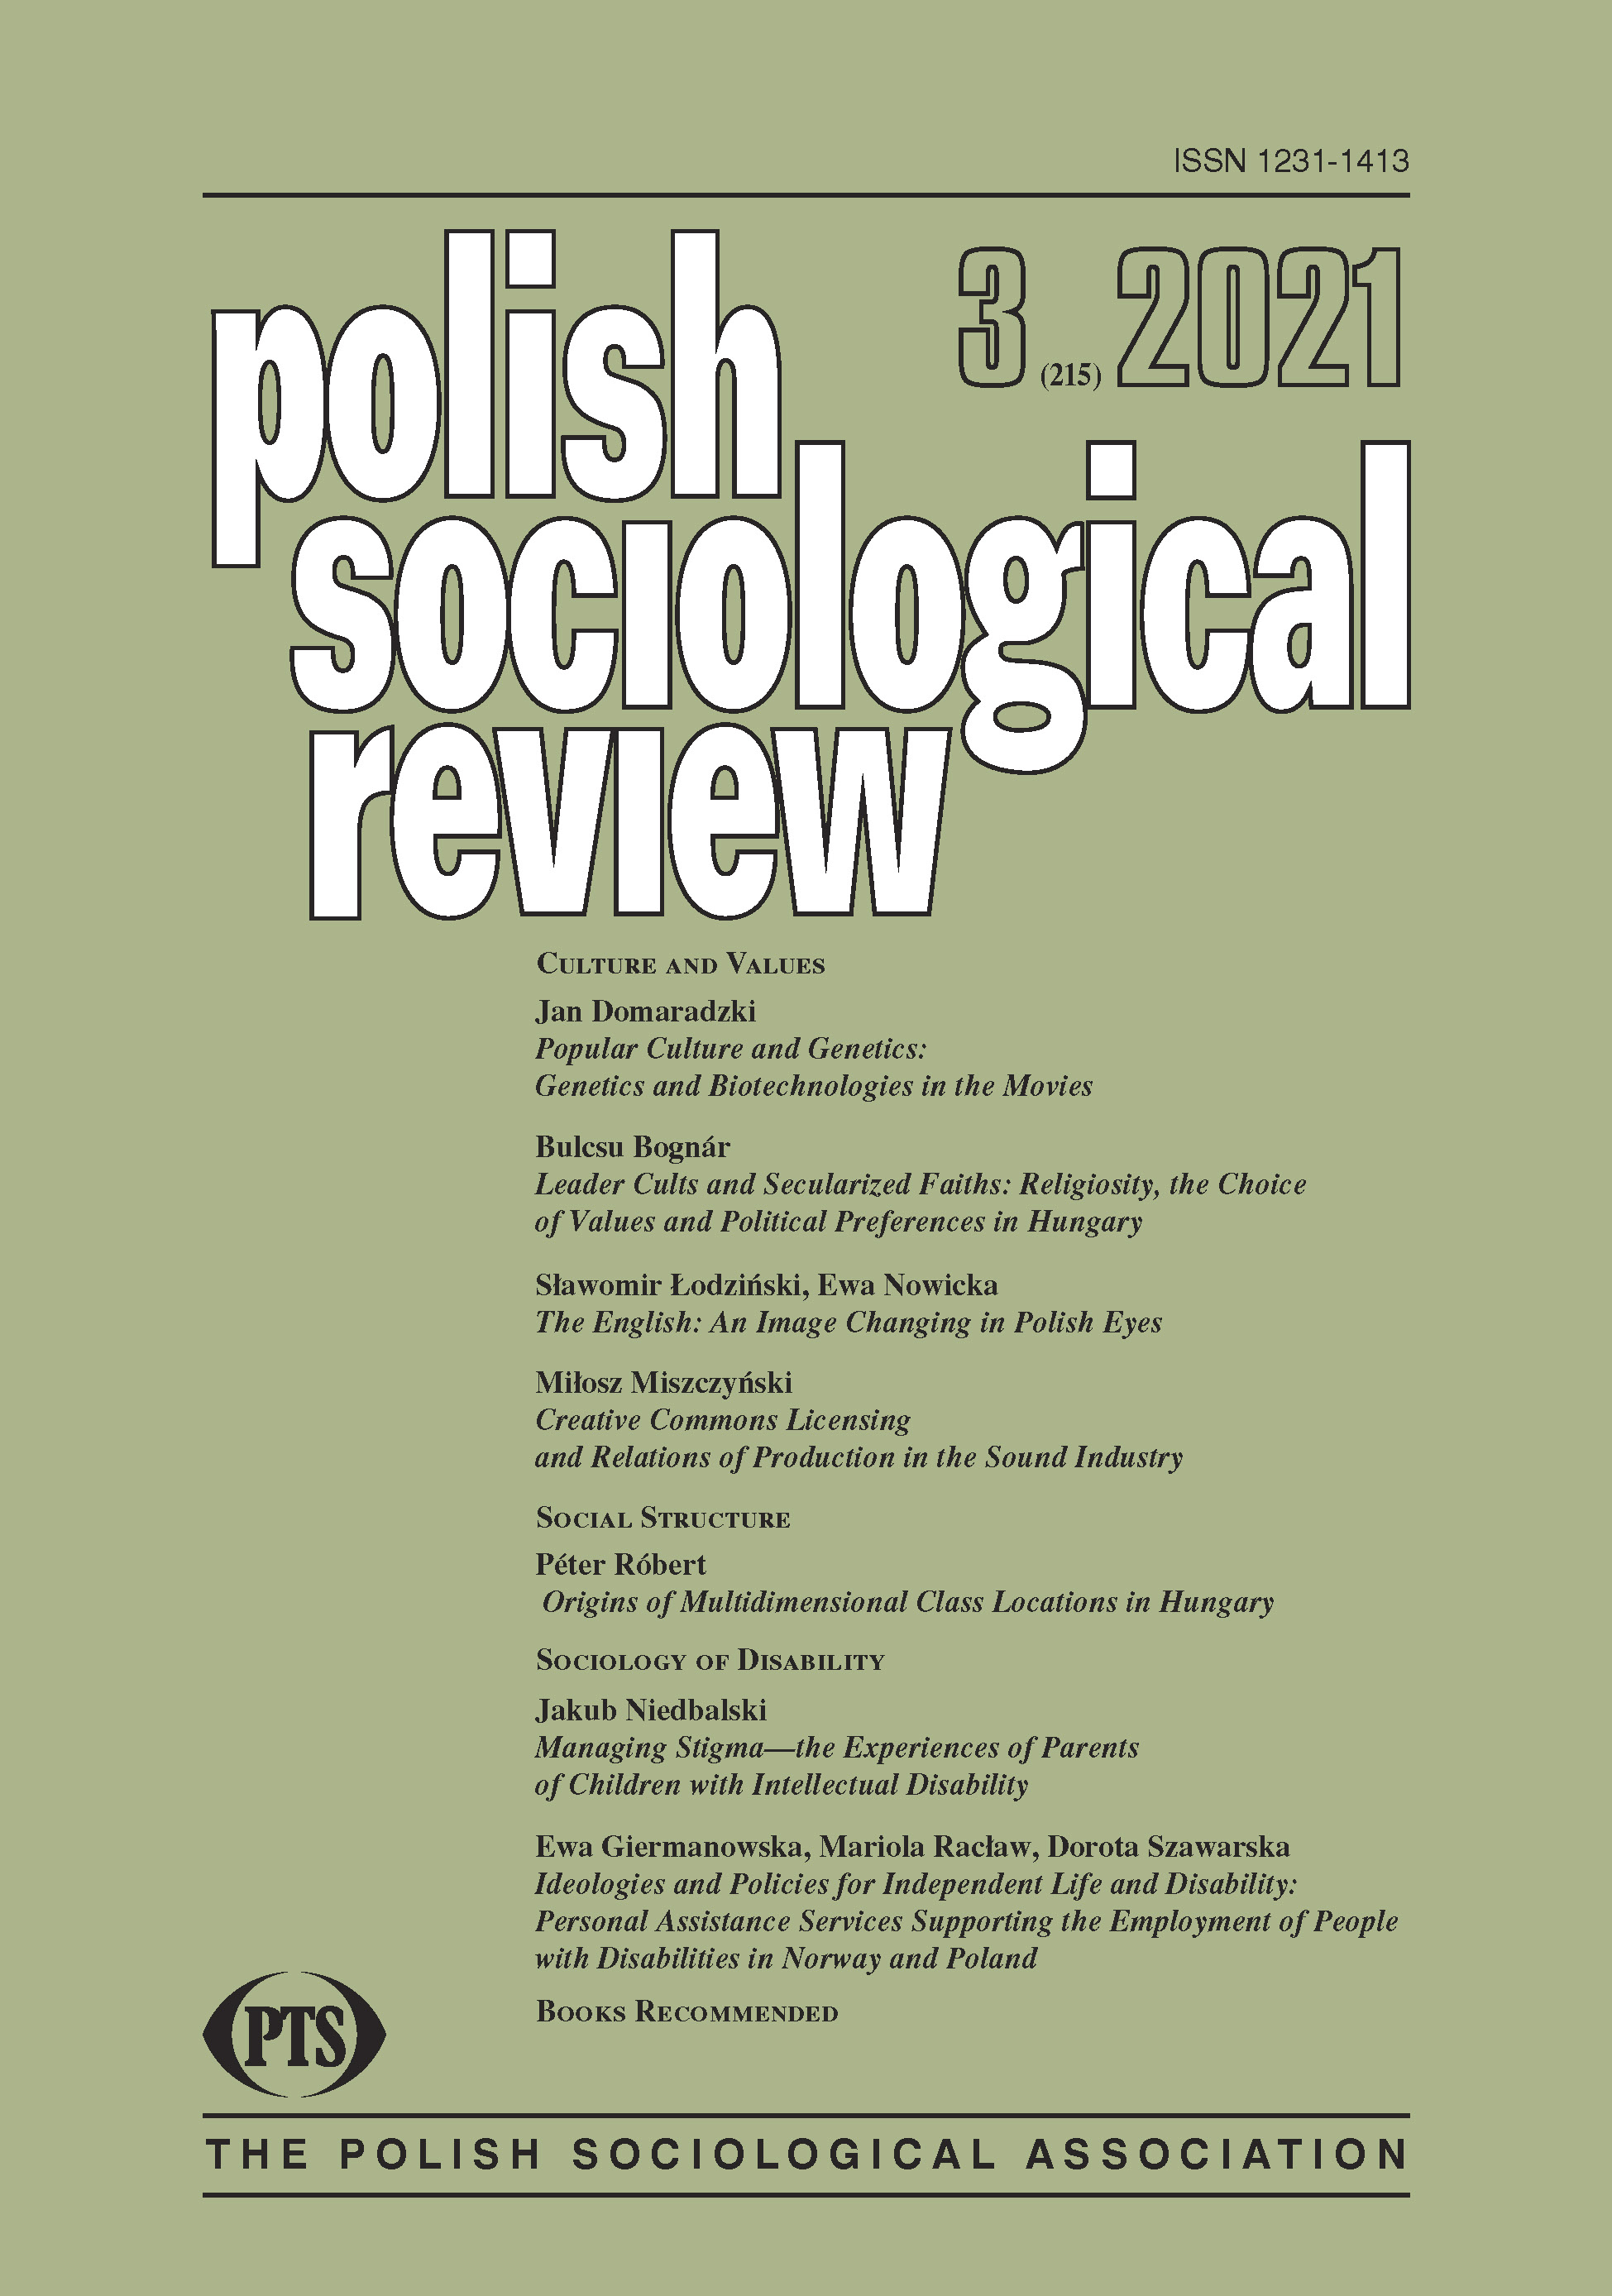 Leader Cults and Secularized Faiths:
Religiosity, the Choice of Values and Political Preferences in Hungary